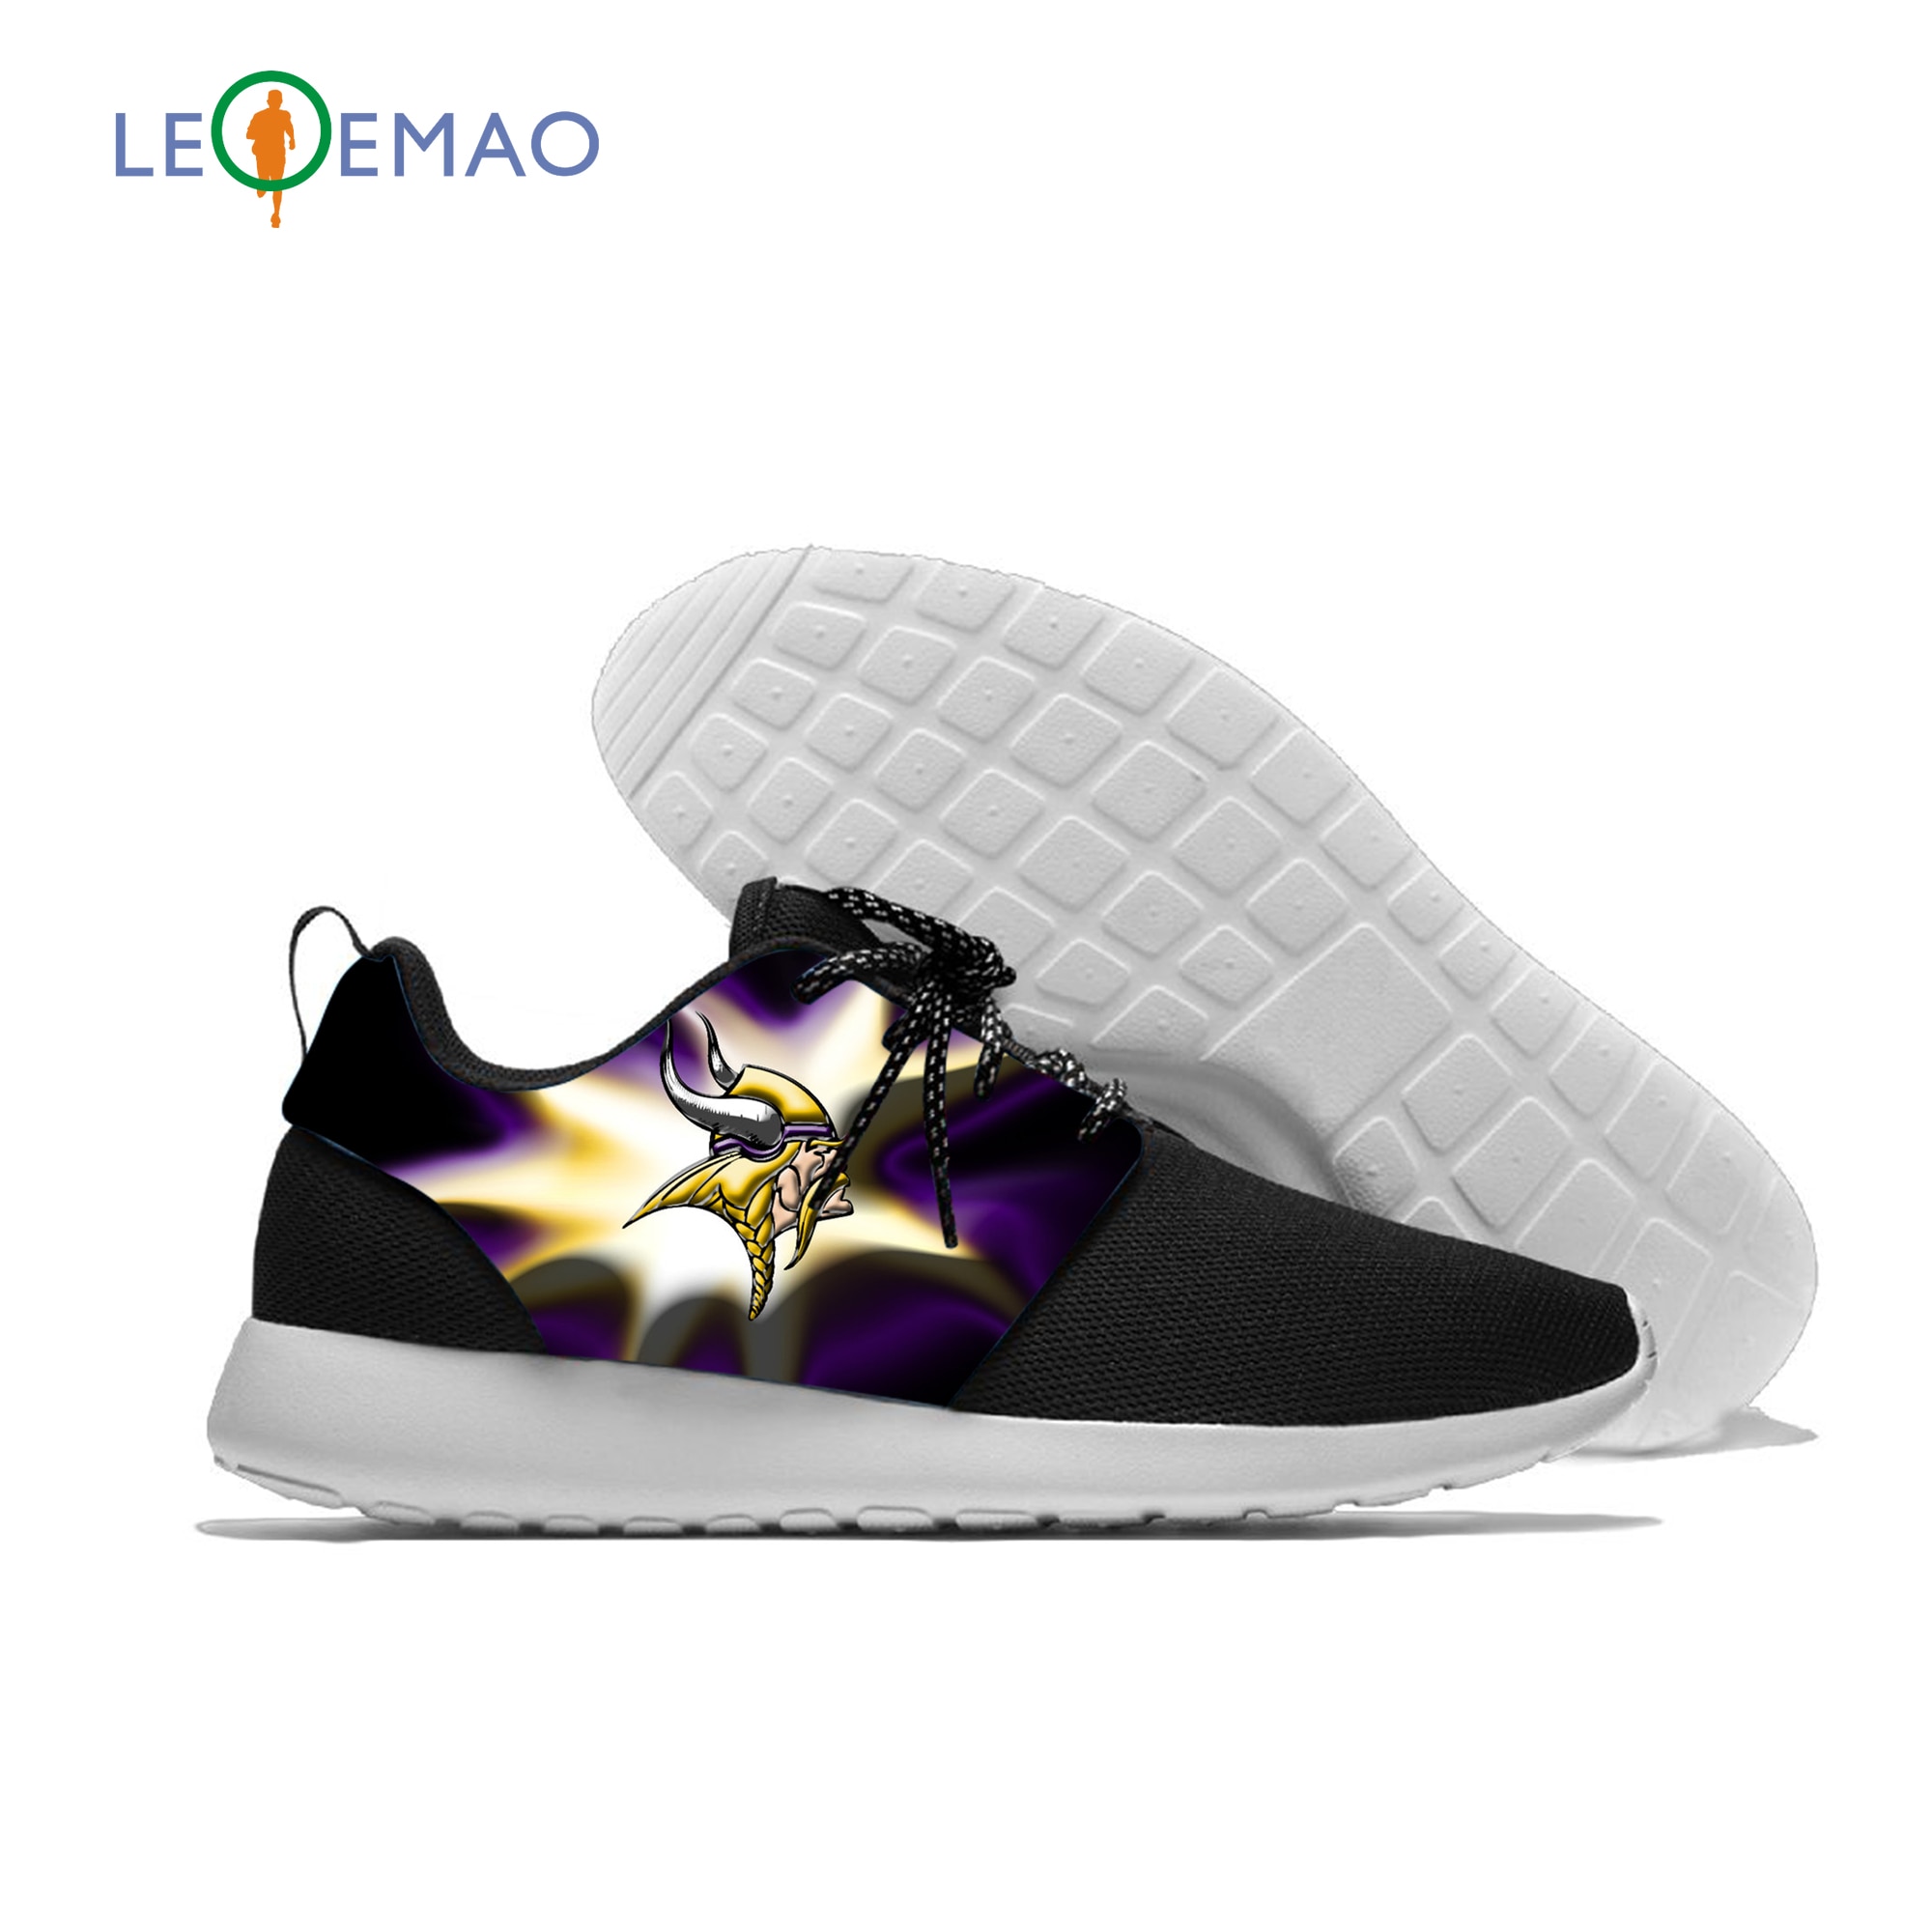 2019 Fashion Cool Men Customized Vikings Printed Sneakers Funny Lightweight Minnesota Football Fans Shoes